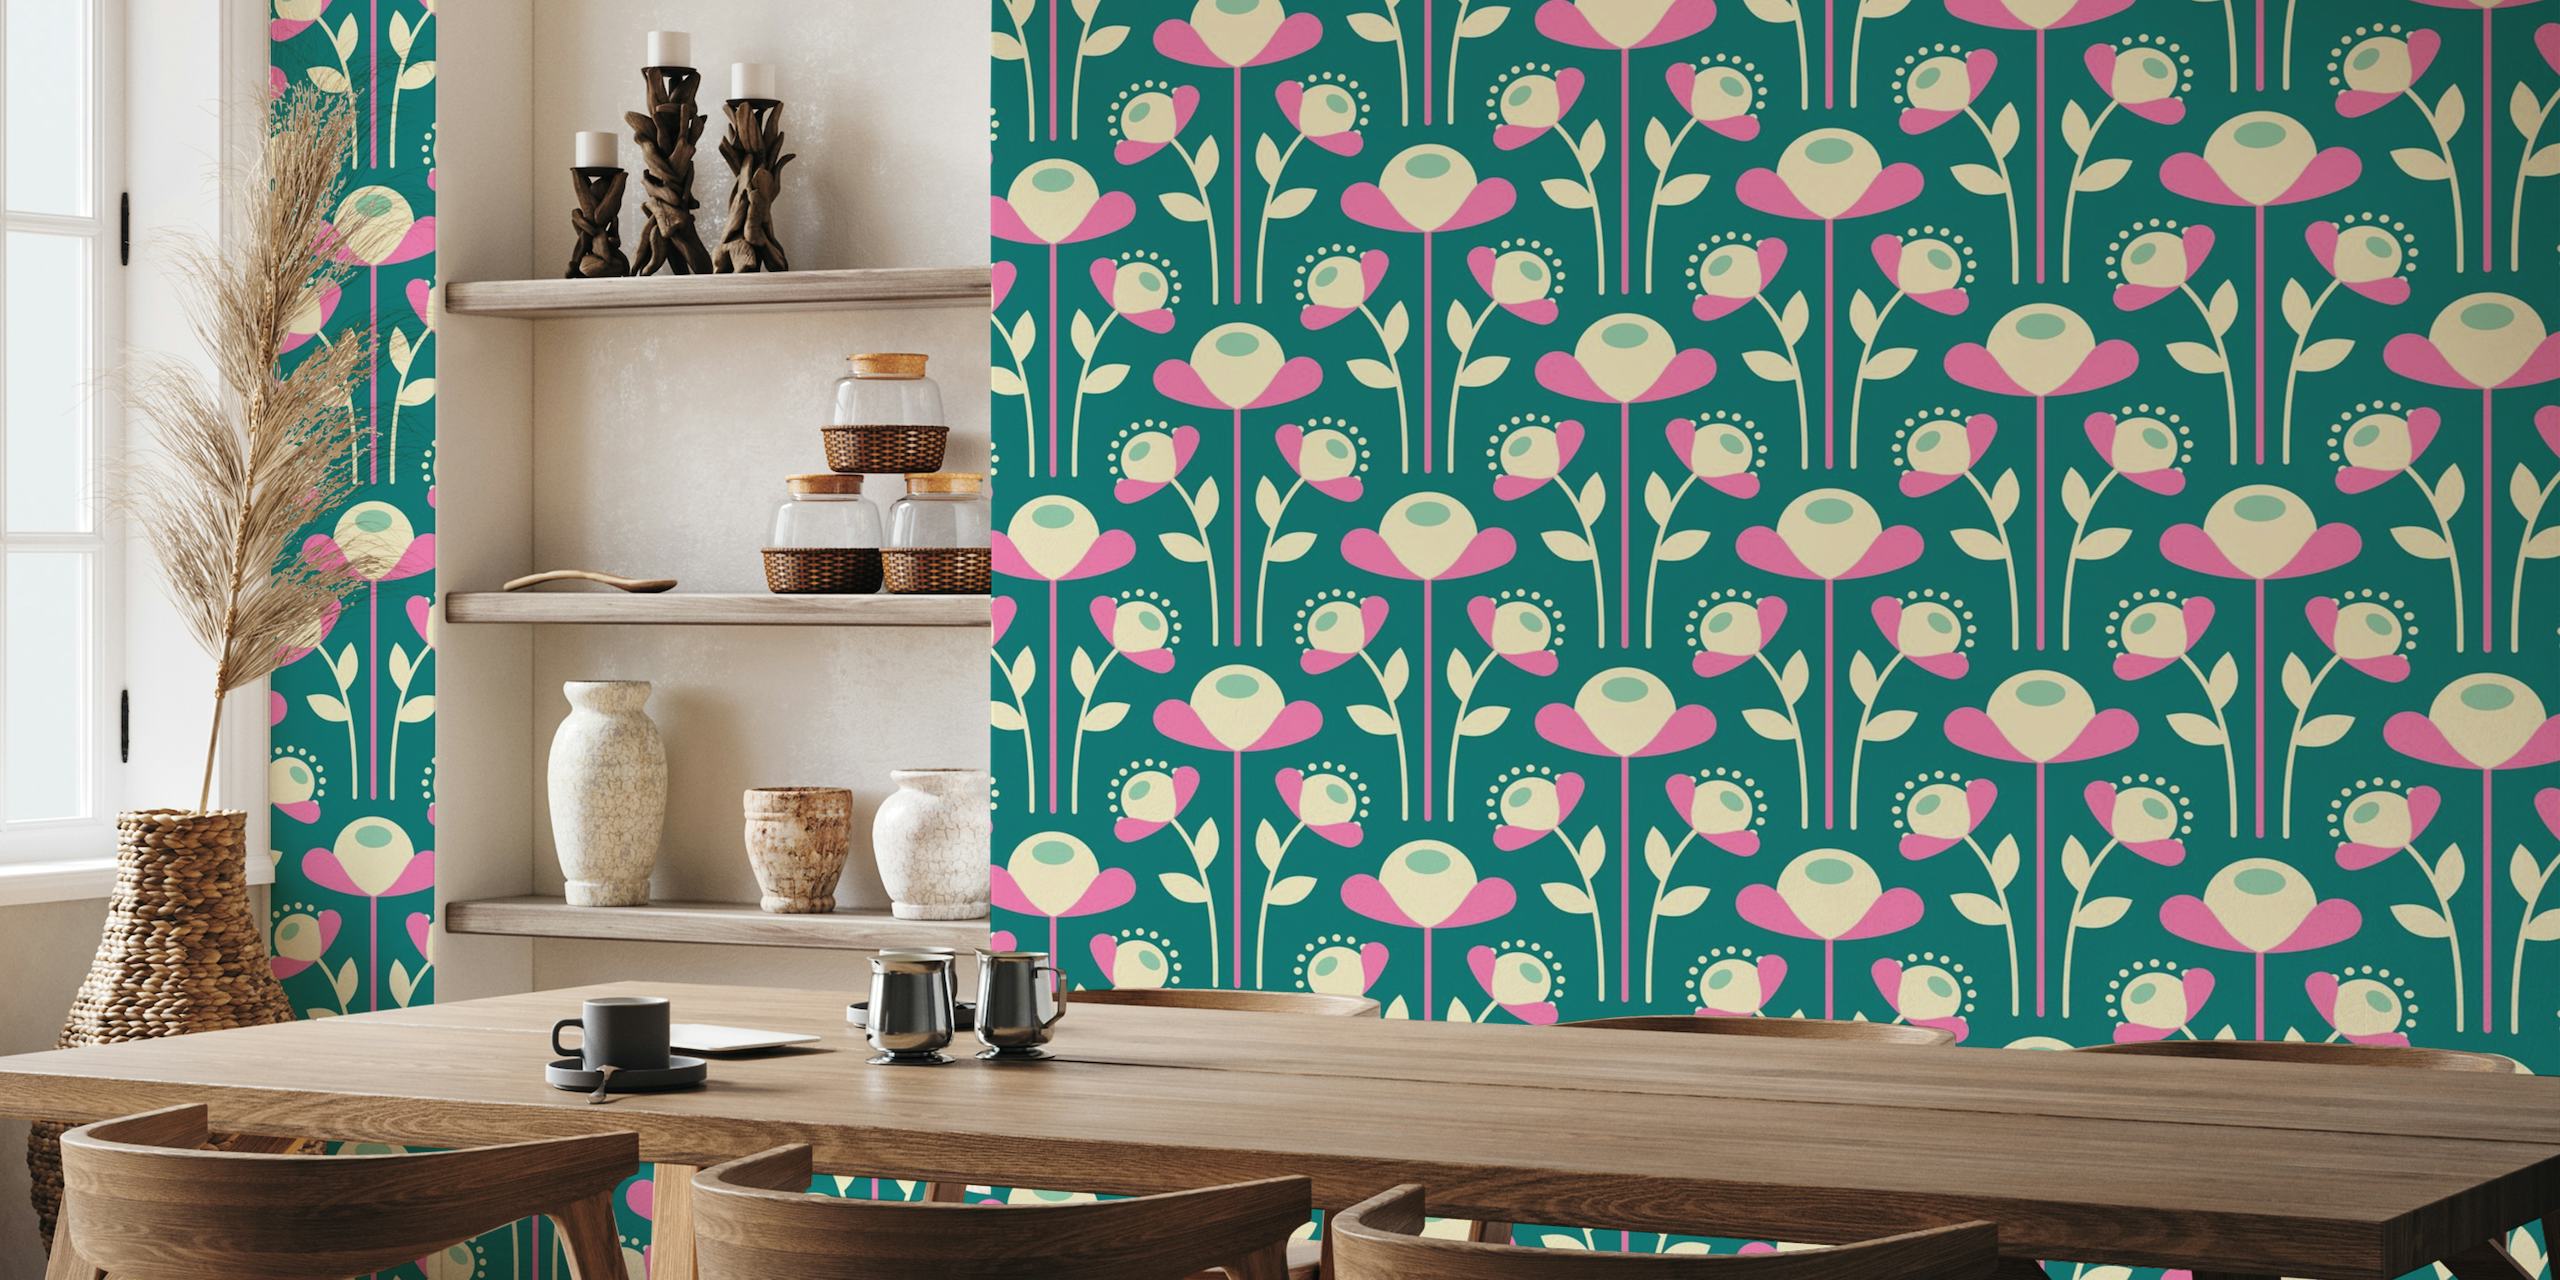 Stylized vintage floral pattern wall mural in pink and green